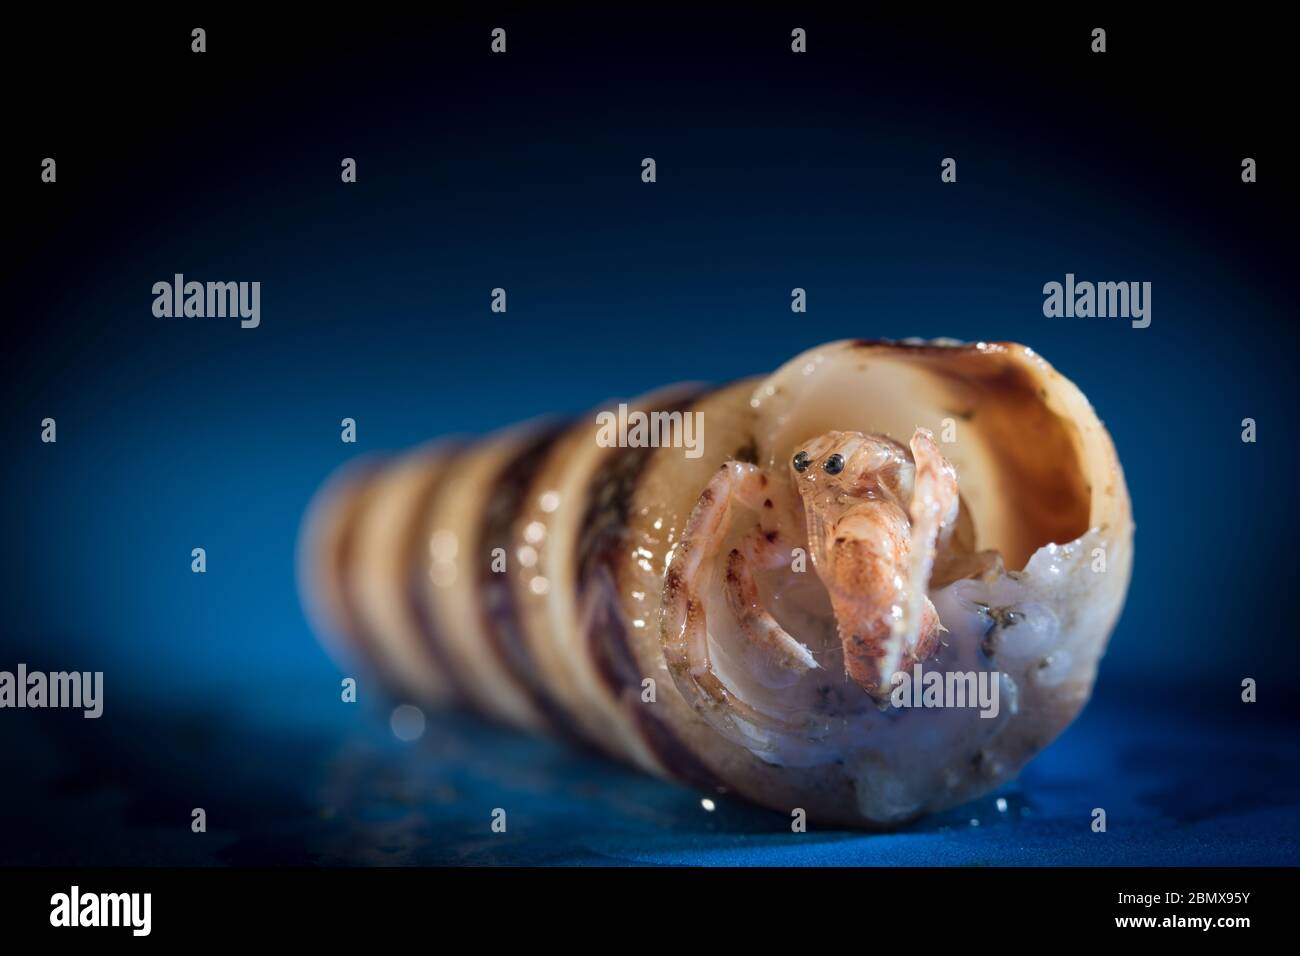 Hermit crabs inhabit a scavenged mollusc shell, like these specimens collected by scientists doing benthic sampling of the Indian Ocean seafloor. Stock Photo